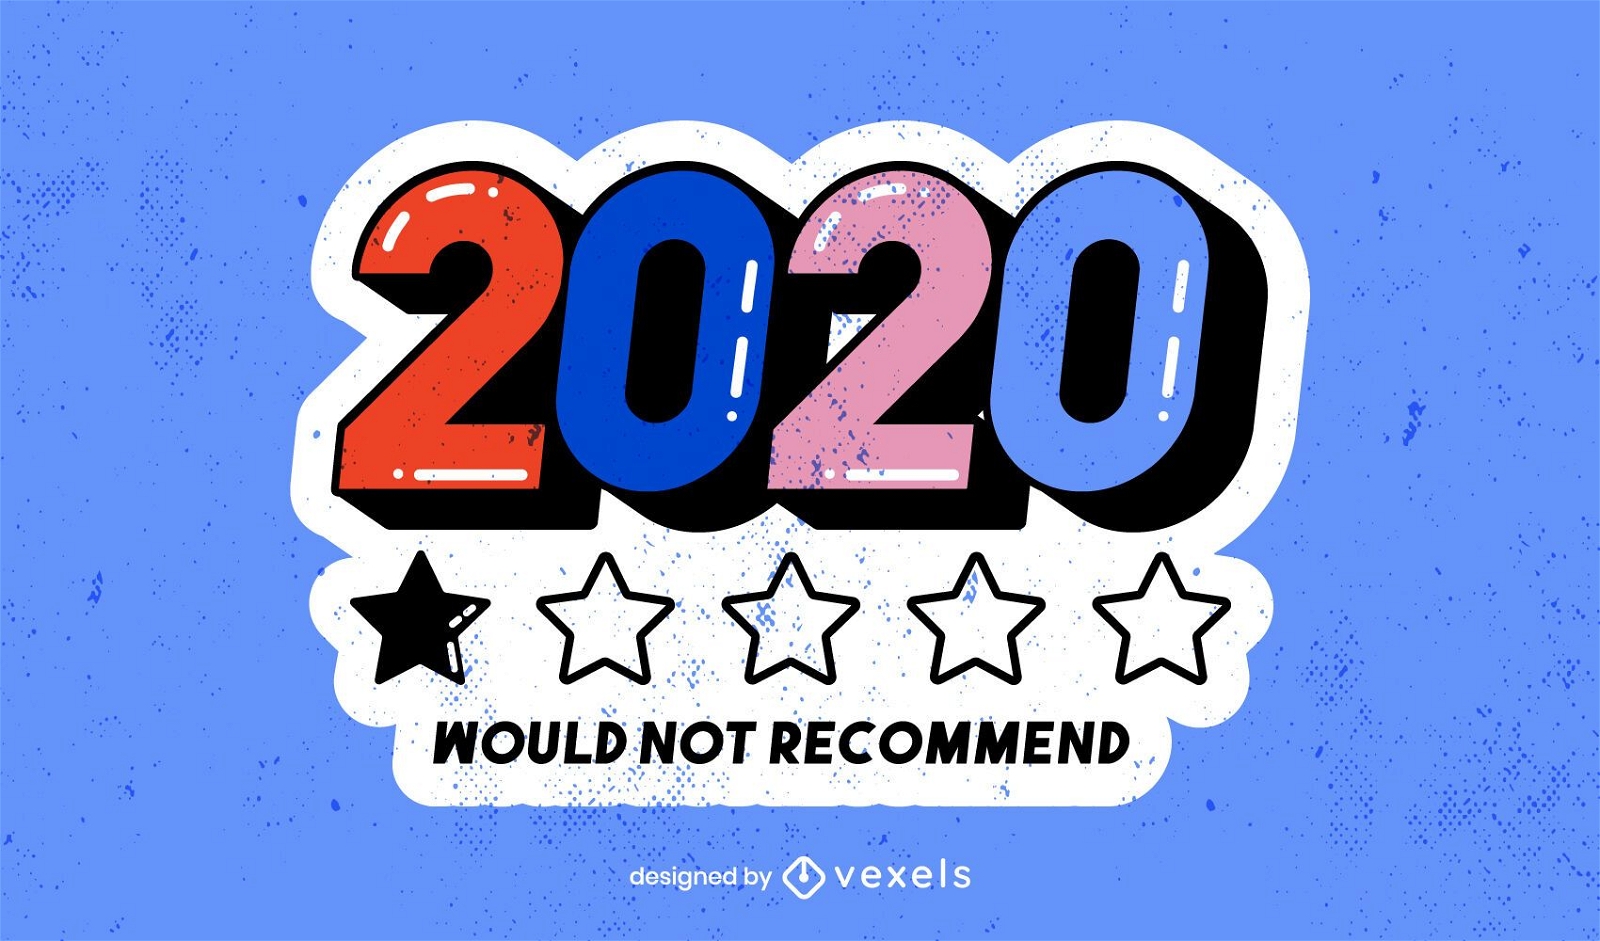 2020 would not recommend illustration design